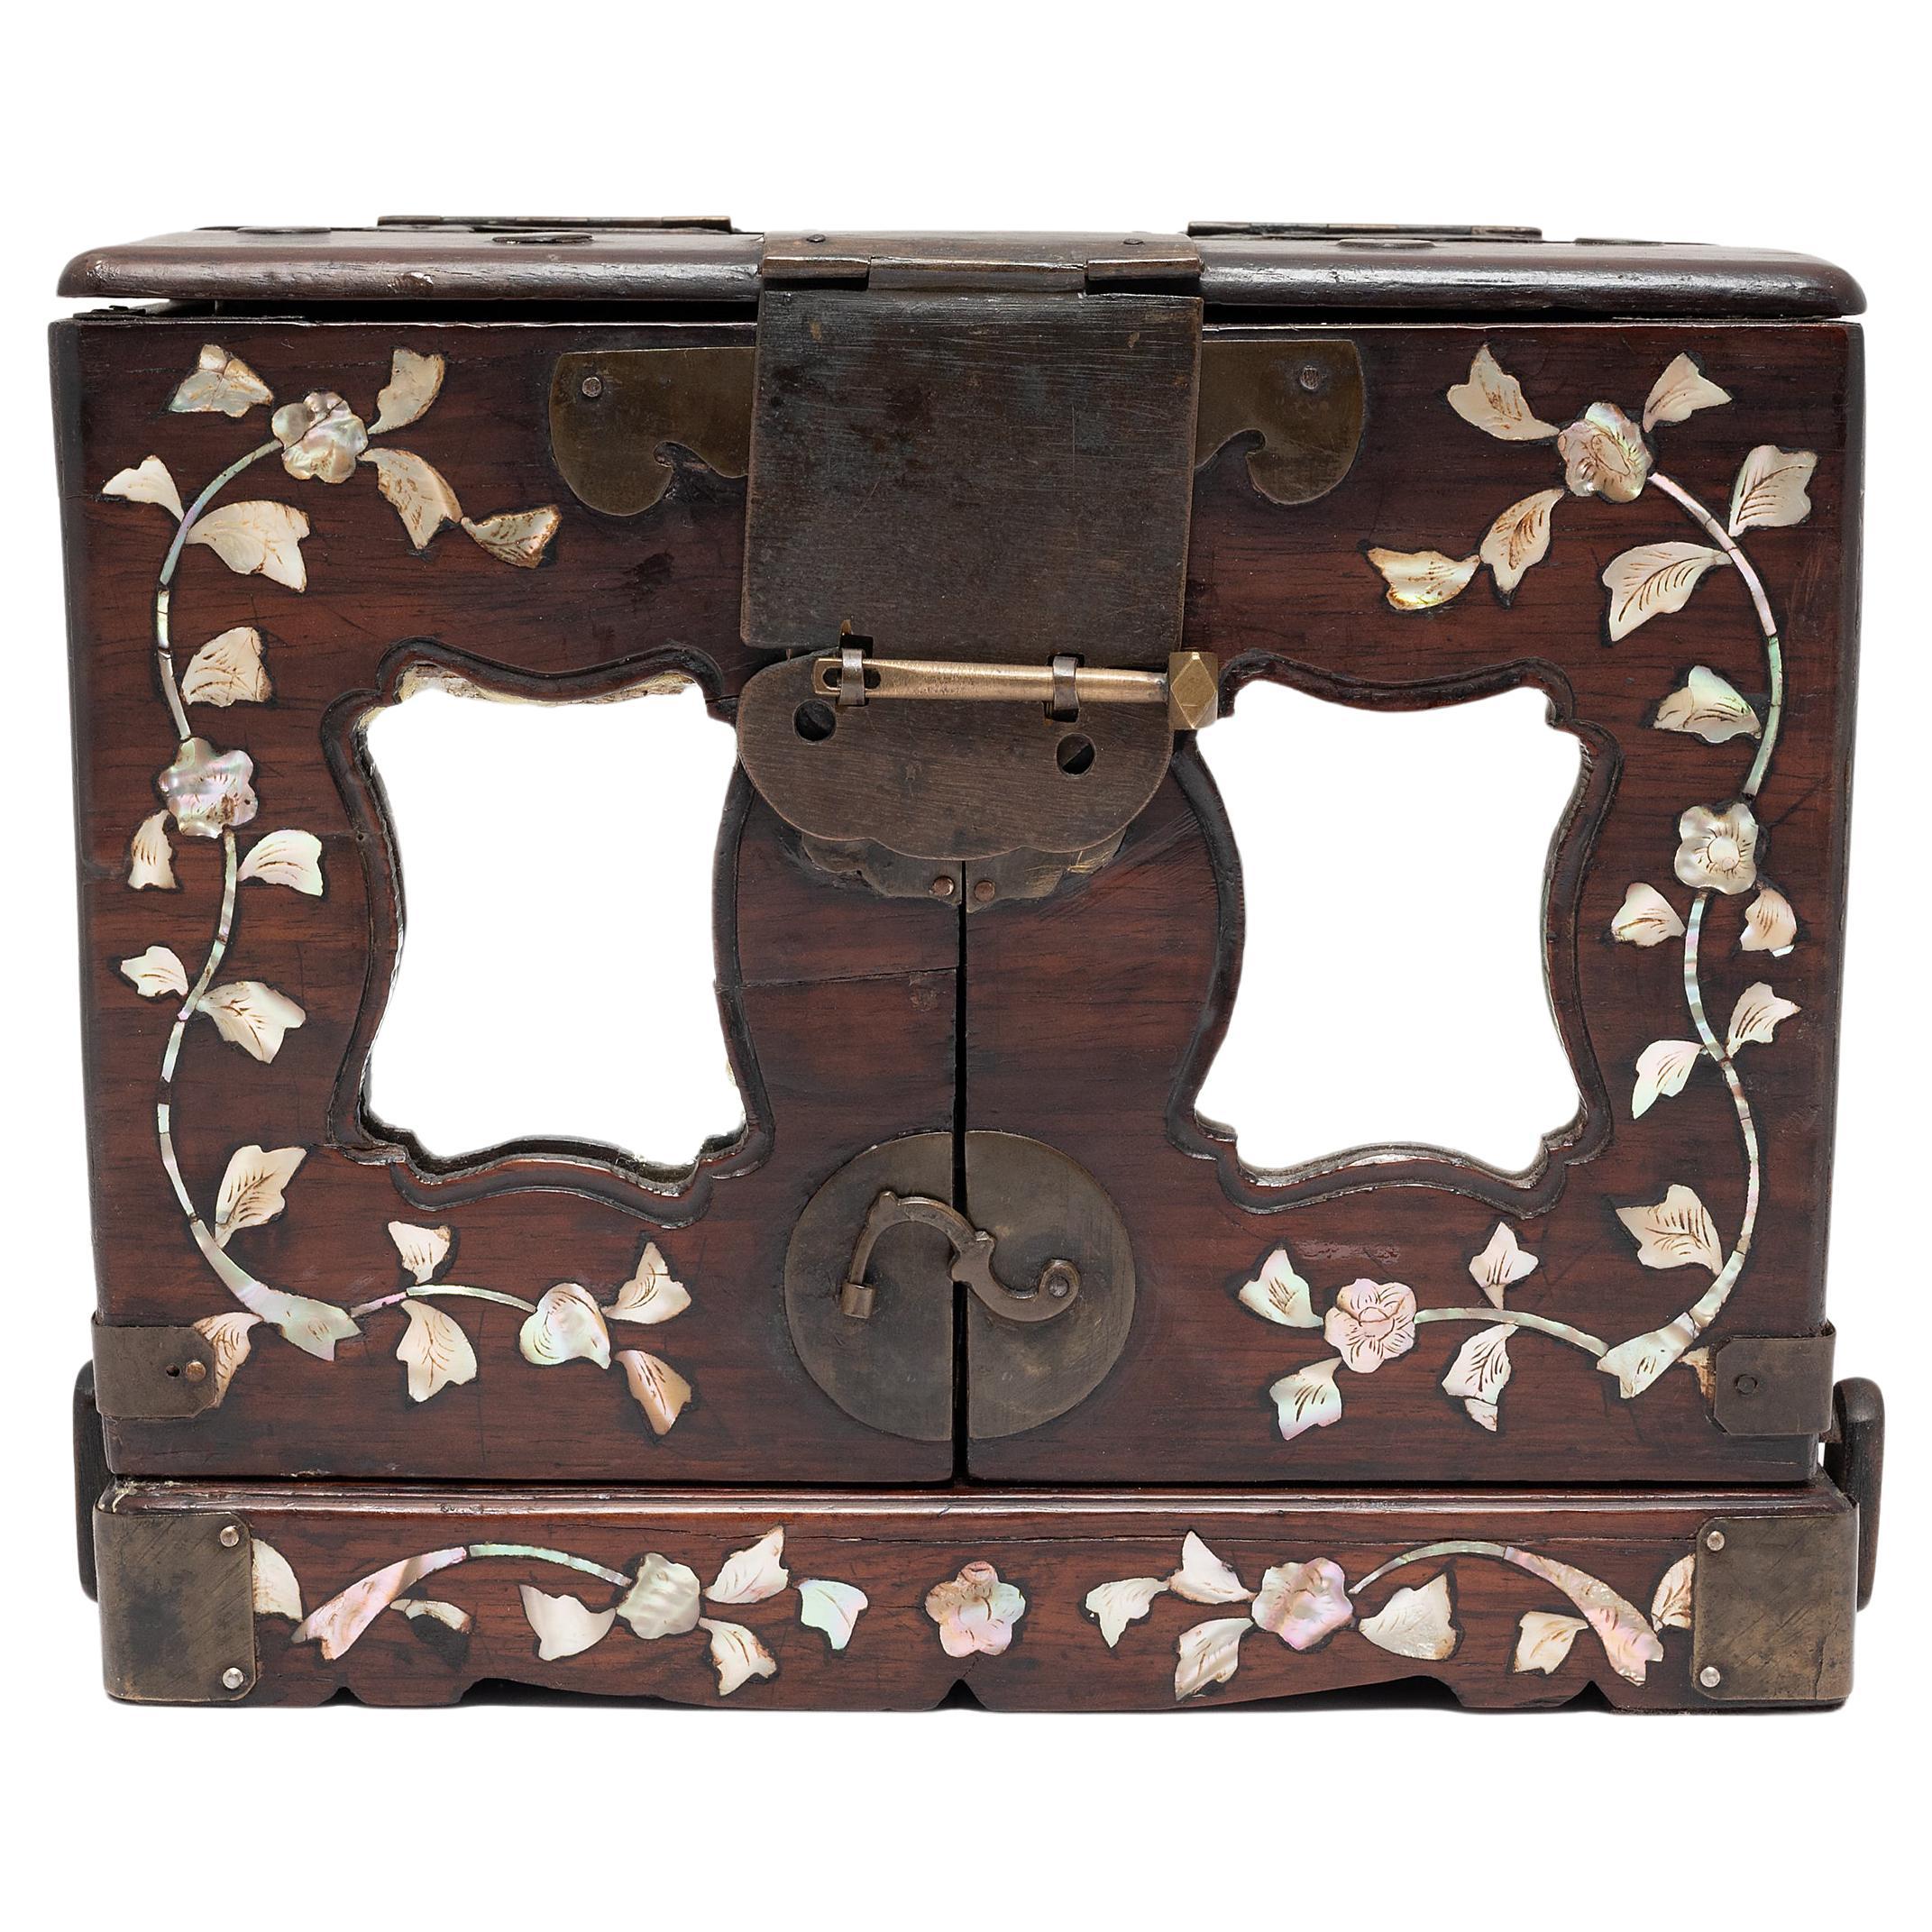 Chinese Hardwood Jewelry Box with Mother of Pearl Inlay, c. 1850